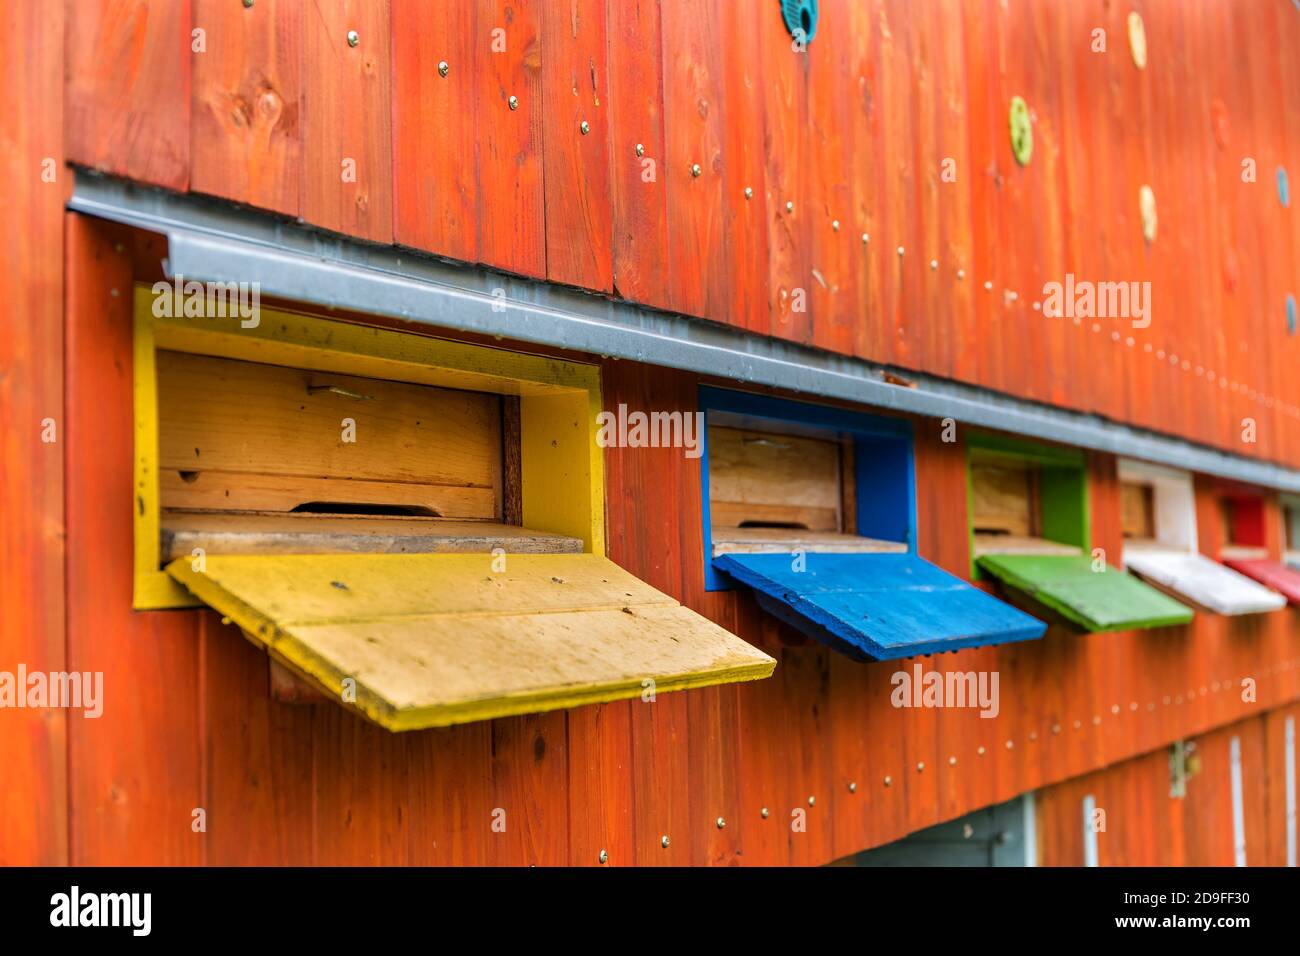 Mobile apiary of different colors inCzech Republic. Hives with bees in a mobile apiary. ?olored beehives in the apiary. Stock Photo